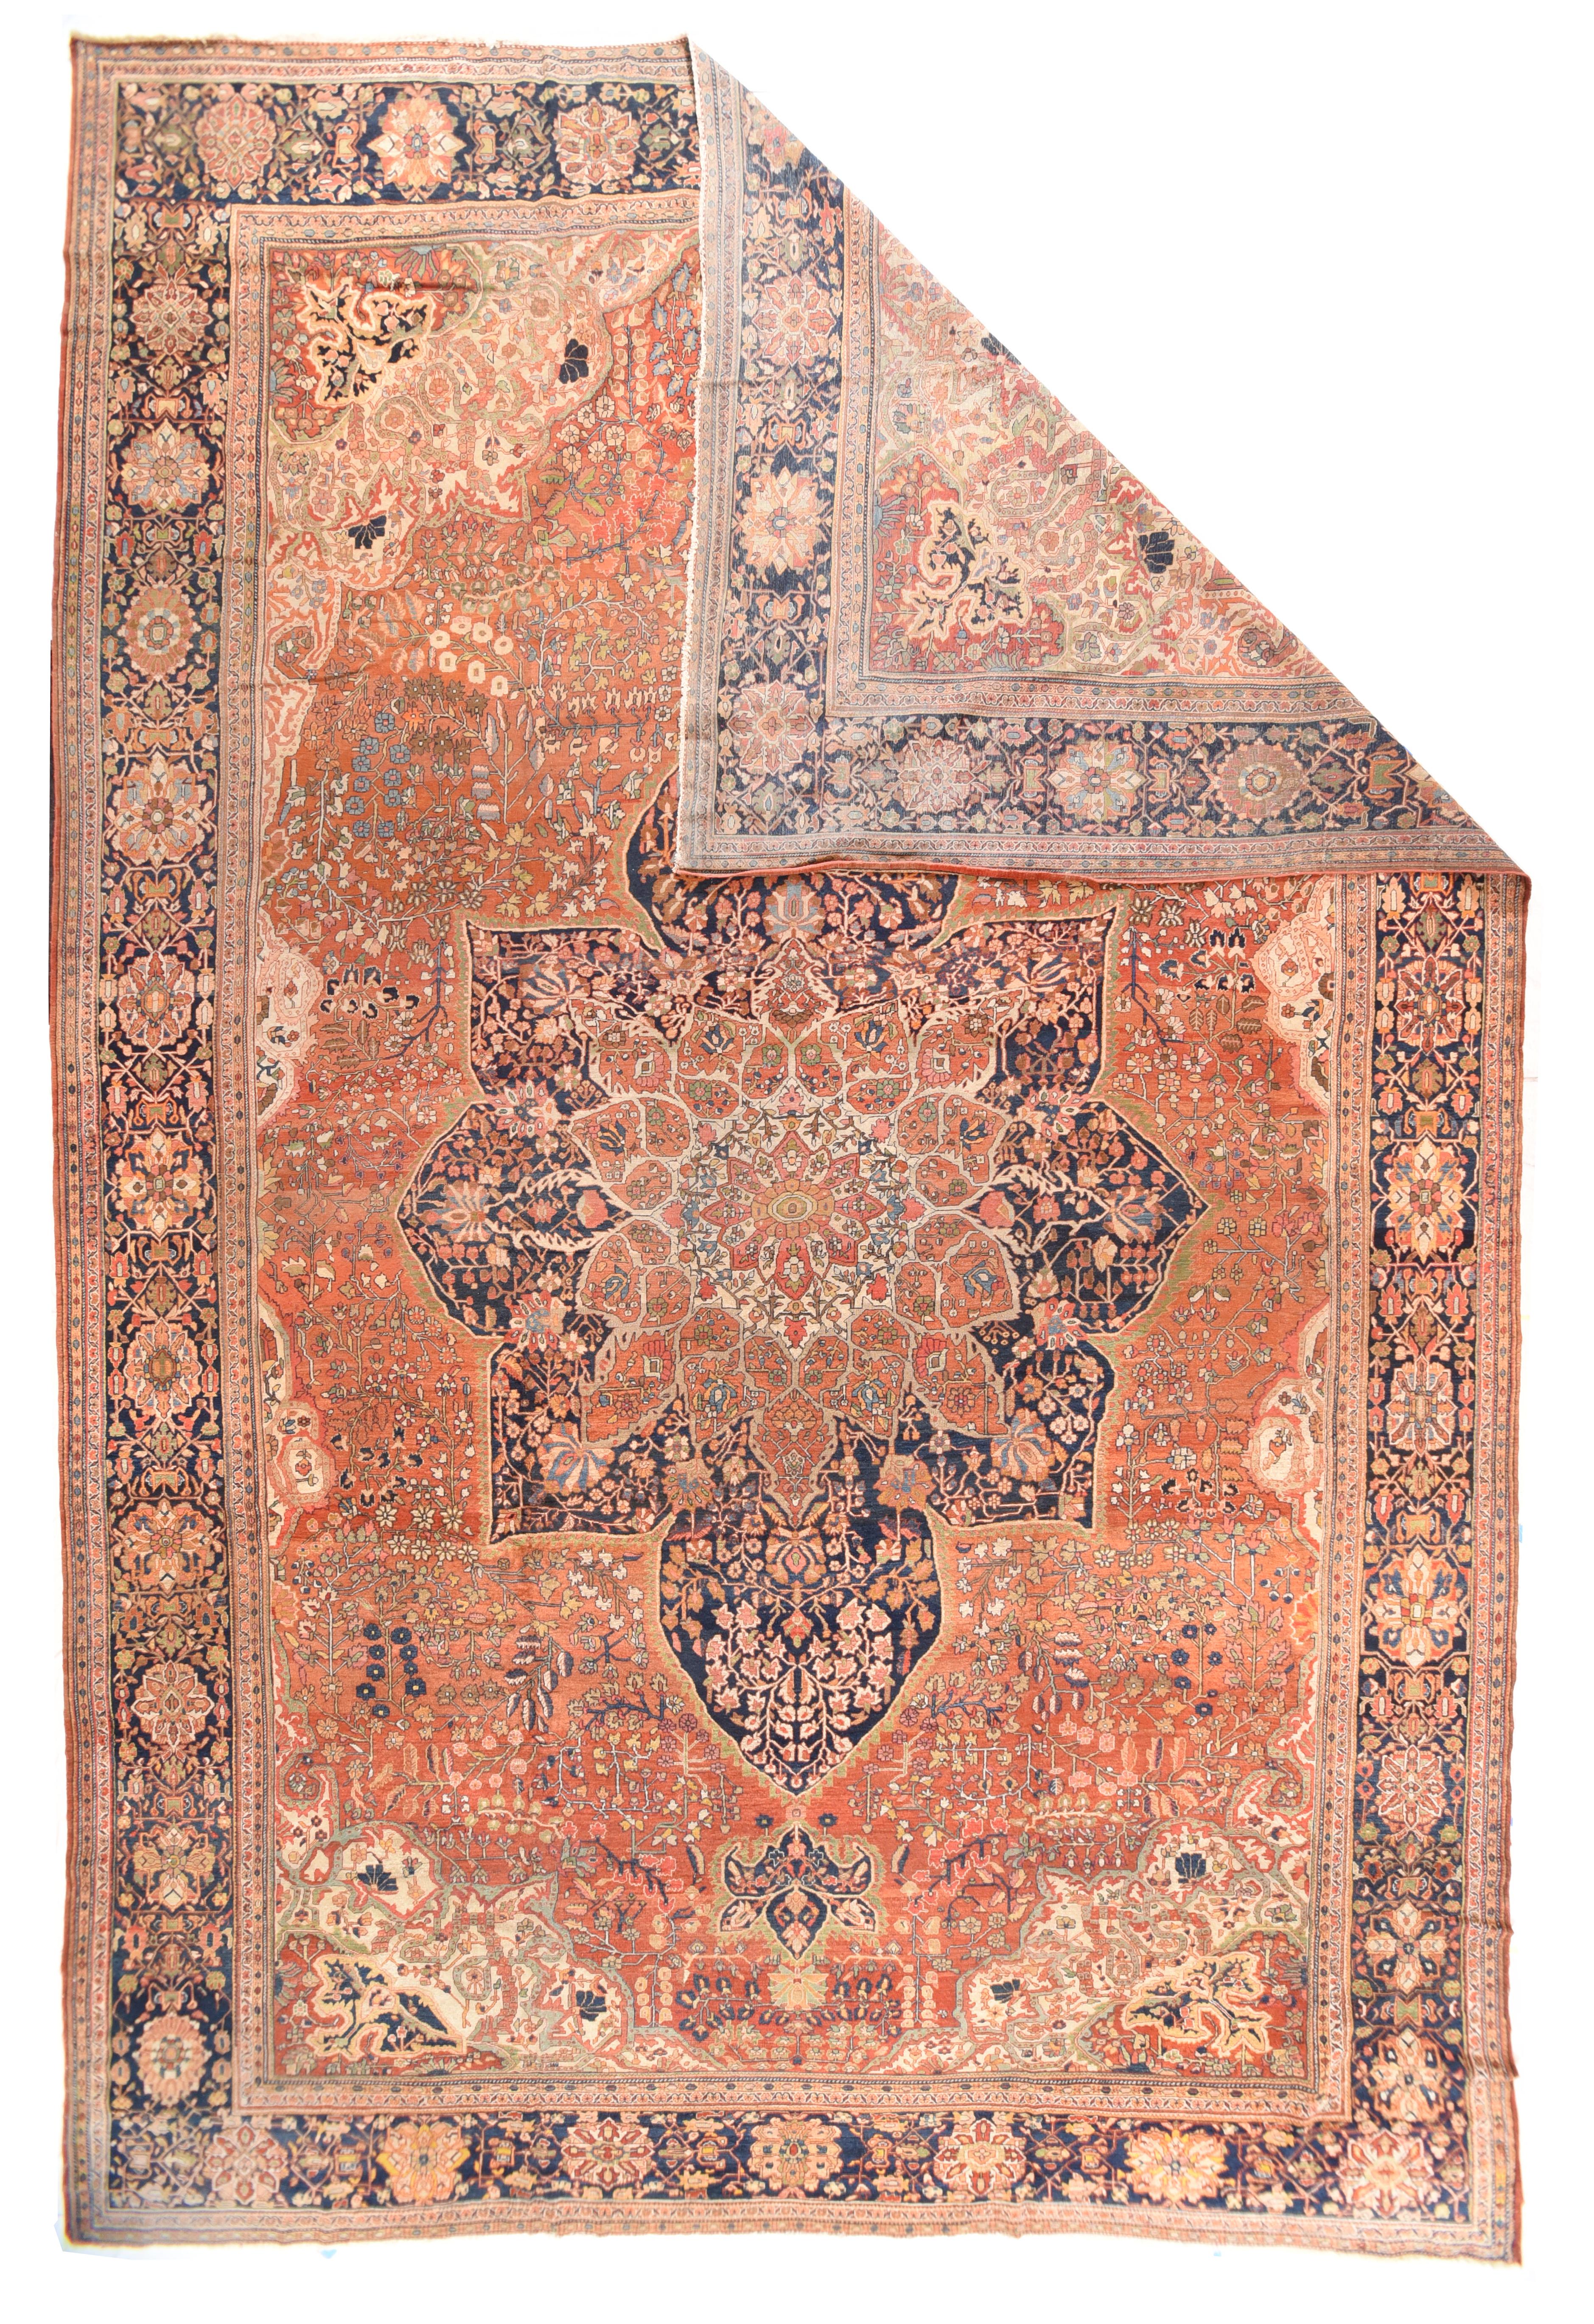 Antique Farahan Sarouk Rug 13'2'' x 19'. The tall, navy pointed octogramme medallion is detailed with palmettes growing from the longer points of the 16 point central rust sub-medallion. At each internal end of the medallion are off white flower